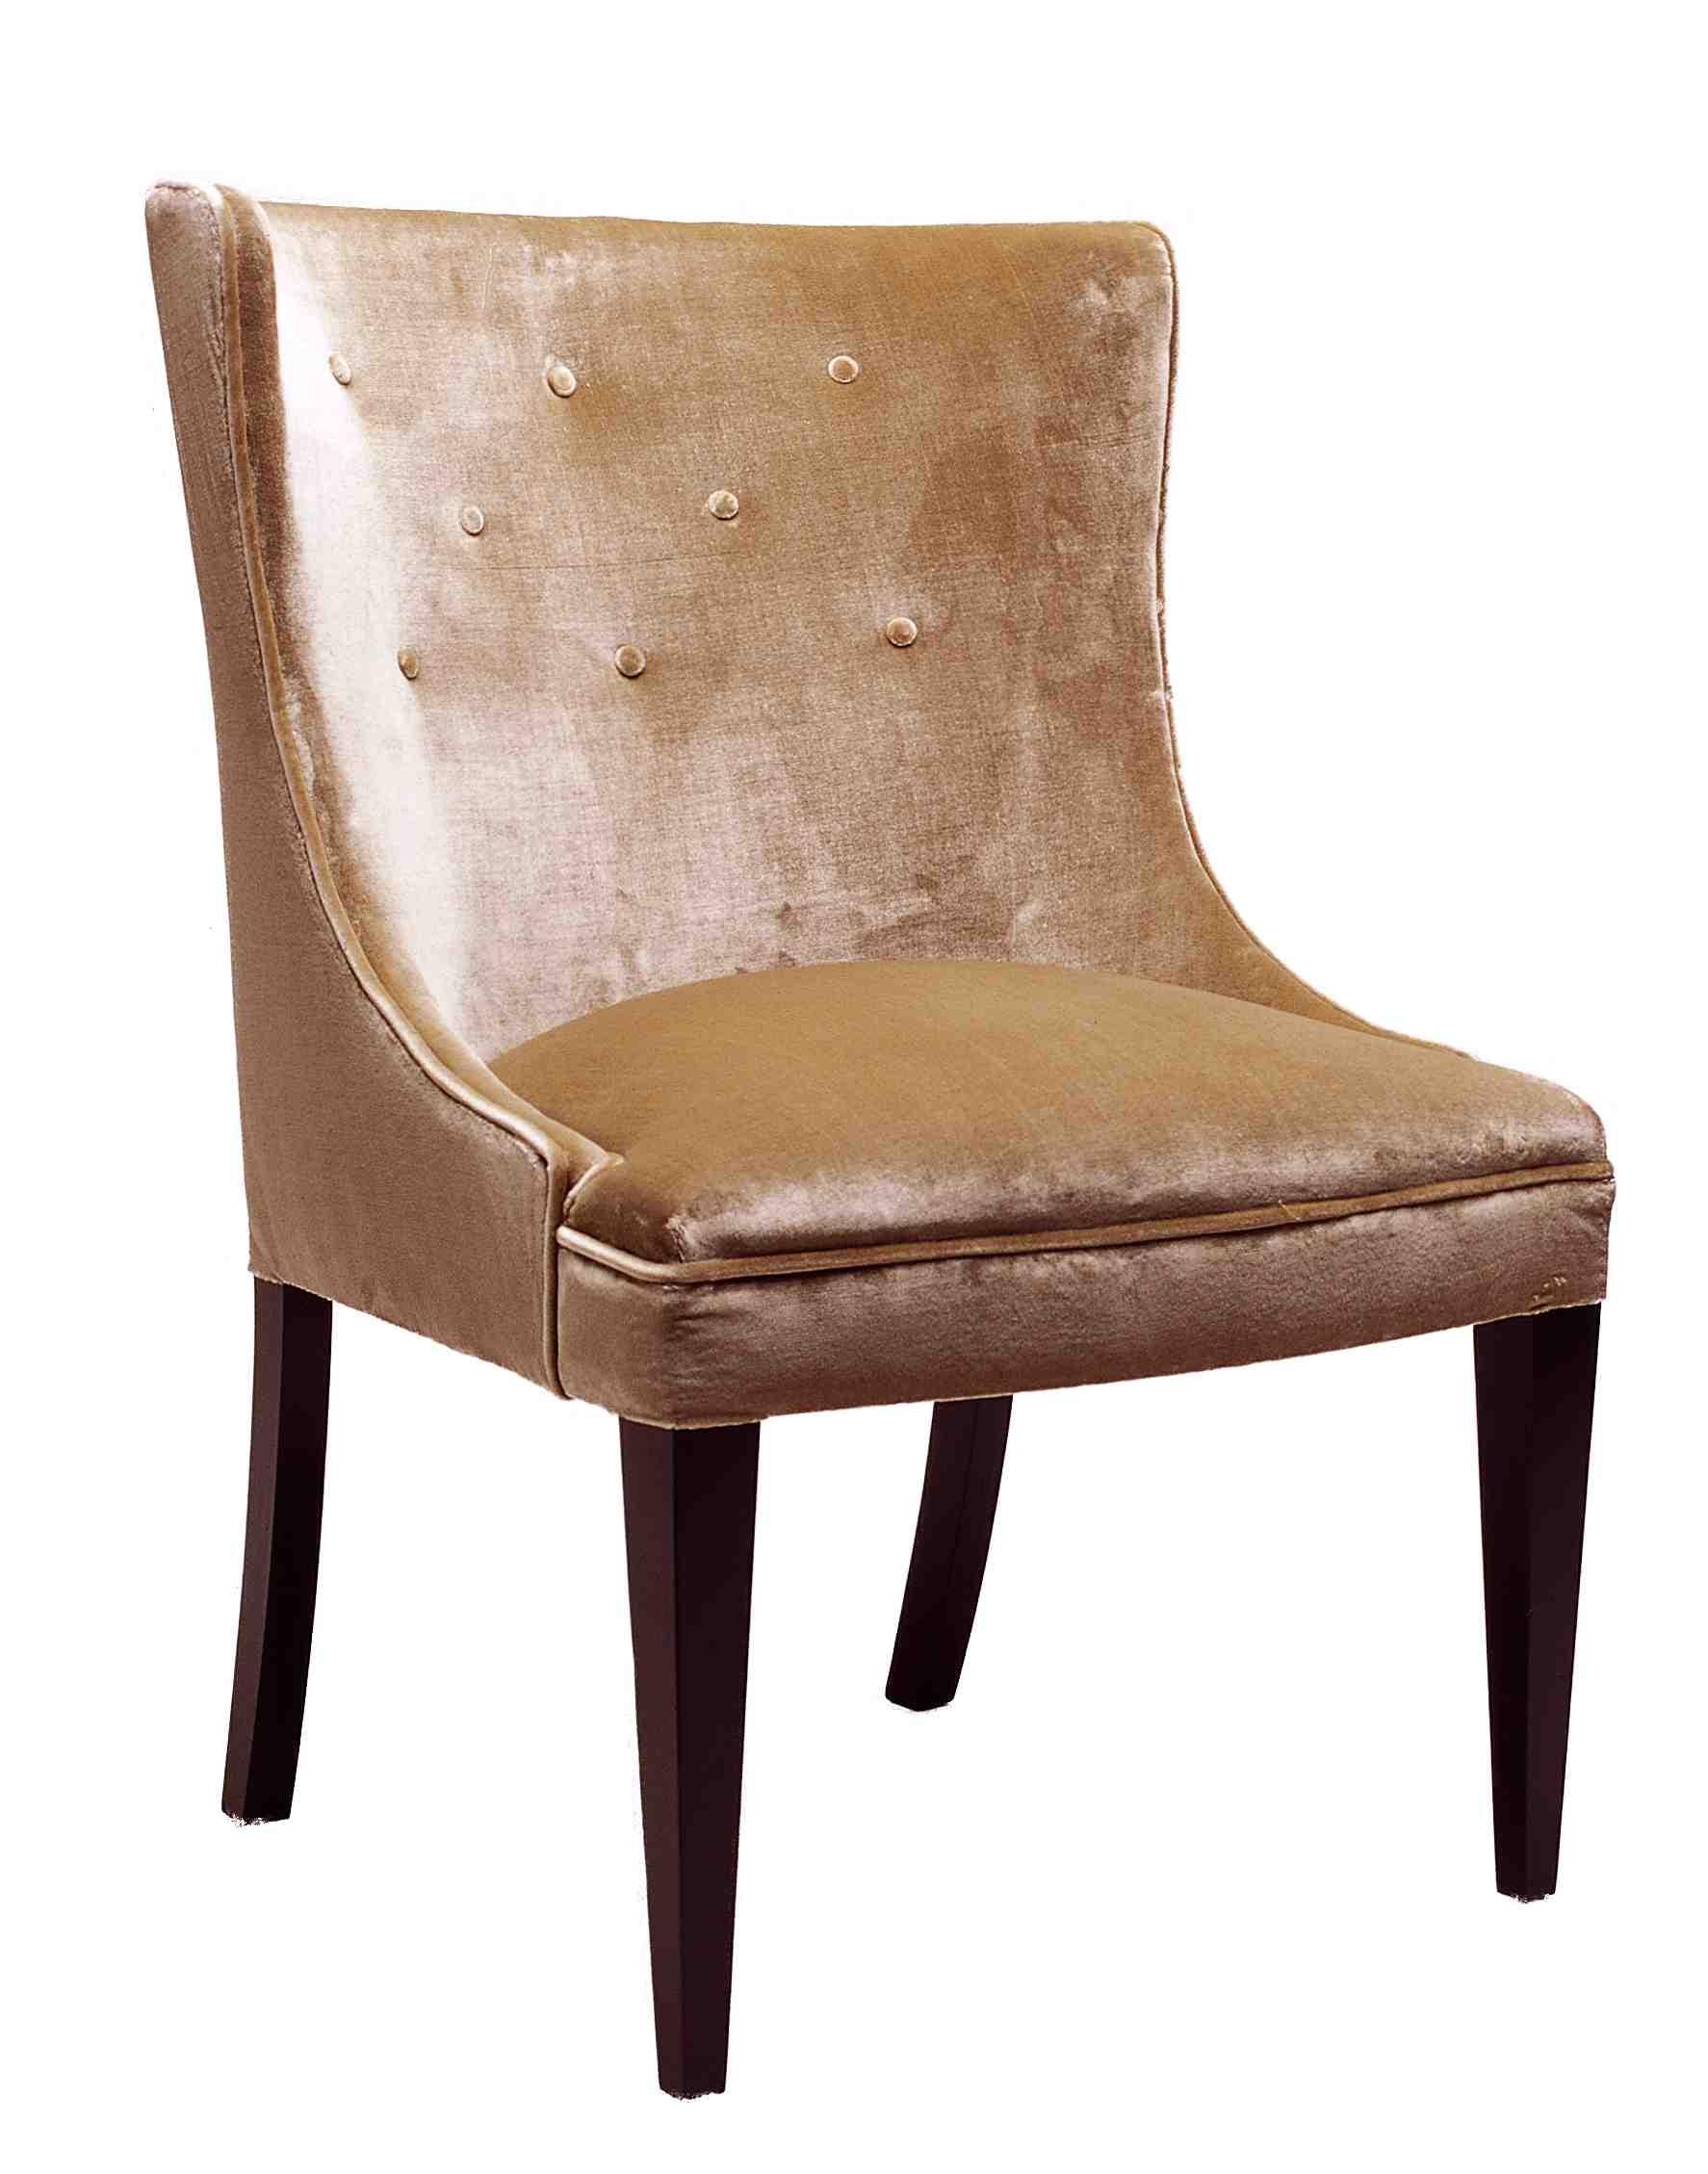 Ebony  Dining Chair 1940's style  with Concave Tufted Back and Tapered alder Legs For Sale